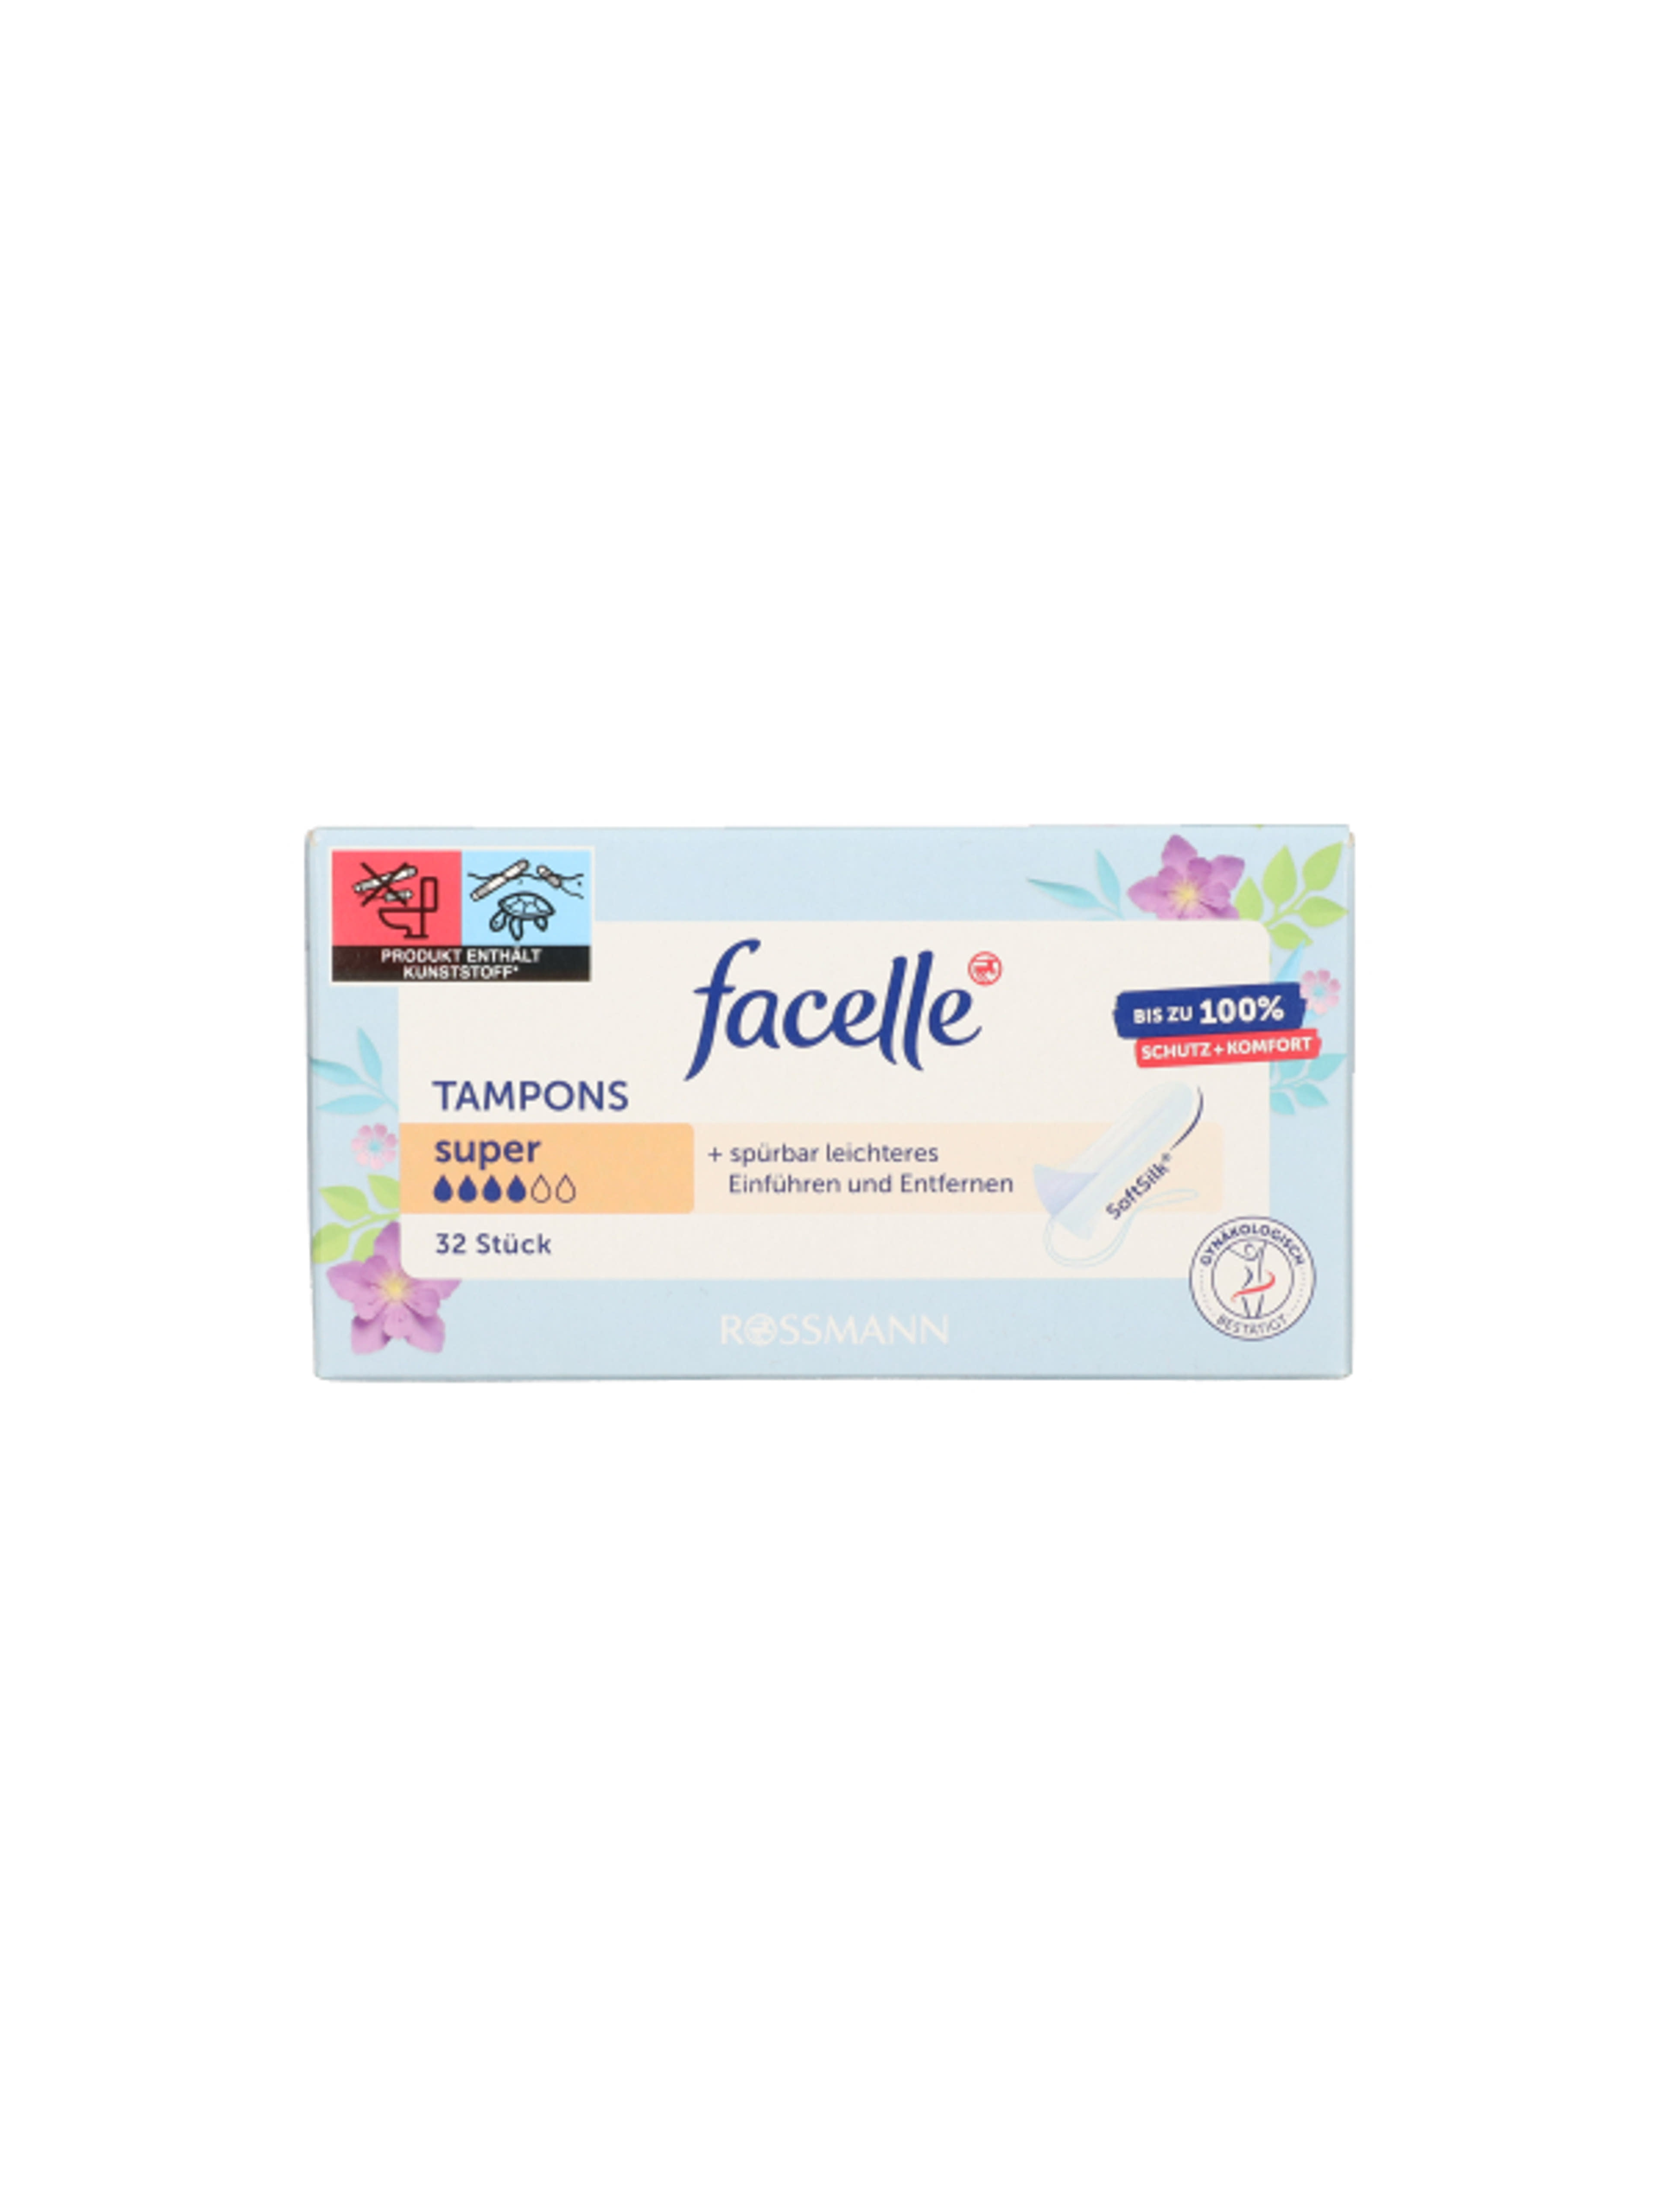 Facelle tampon, super - 32 db